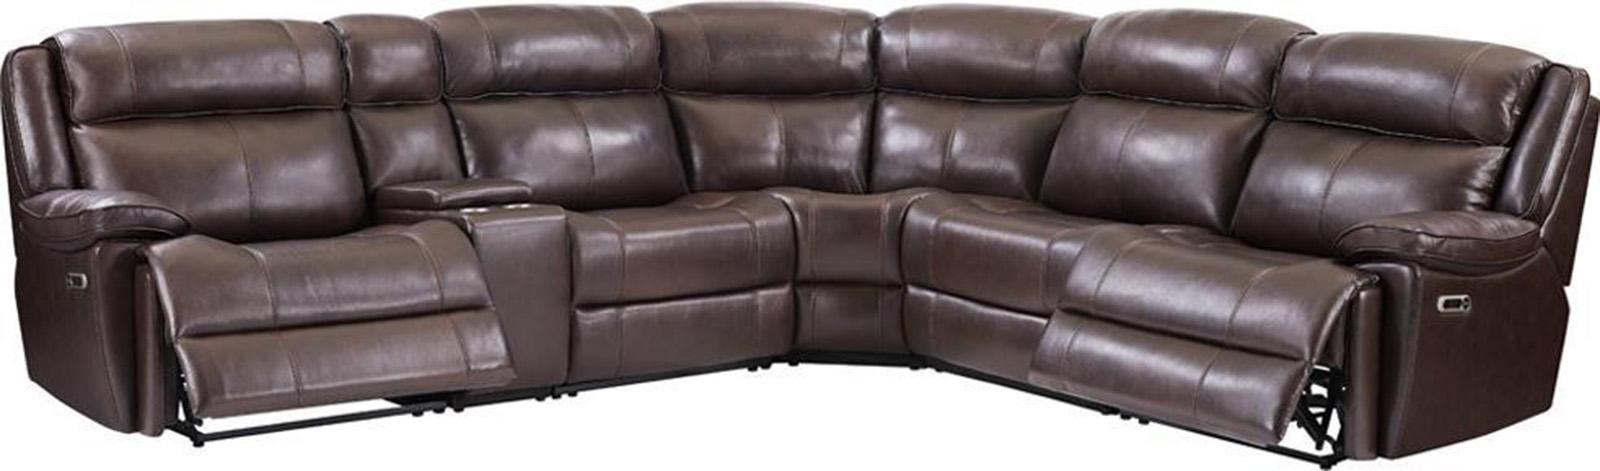 Parker House Furniture Eclipse Corner Wedge in Florence Brown